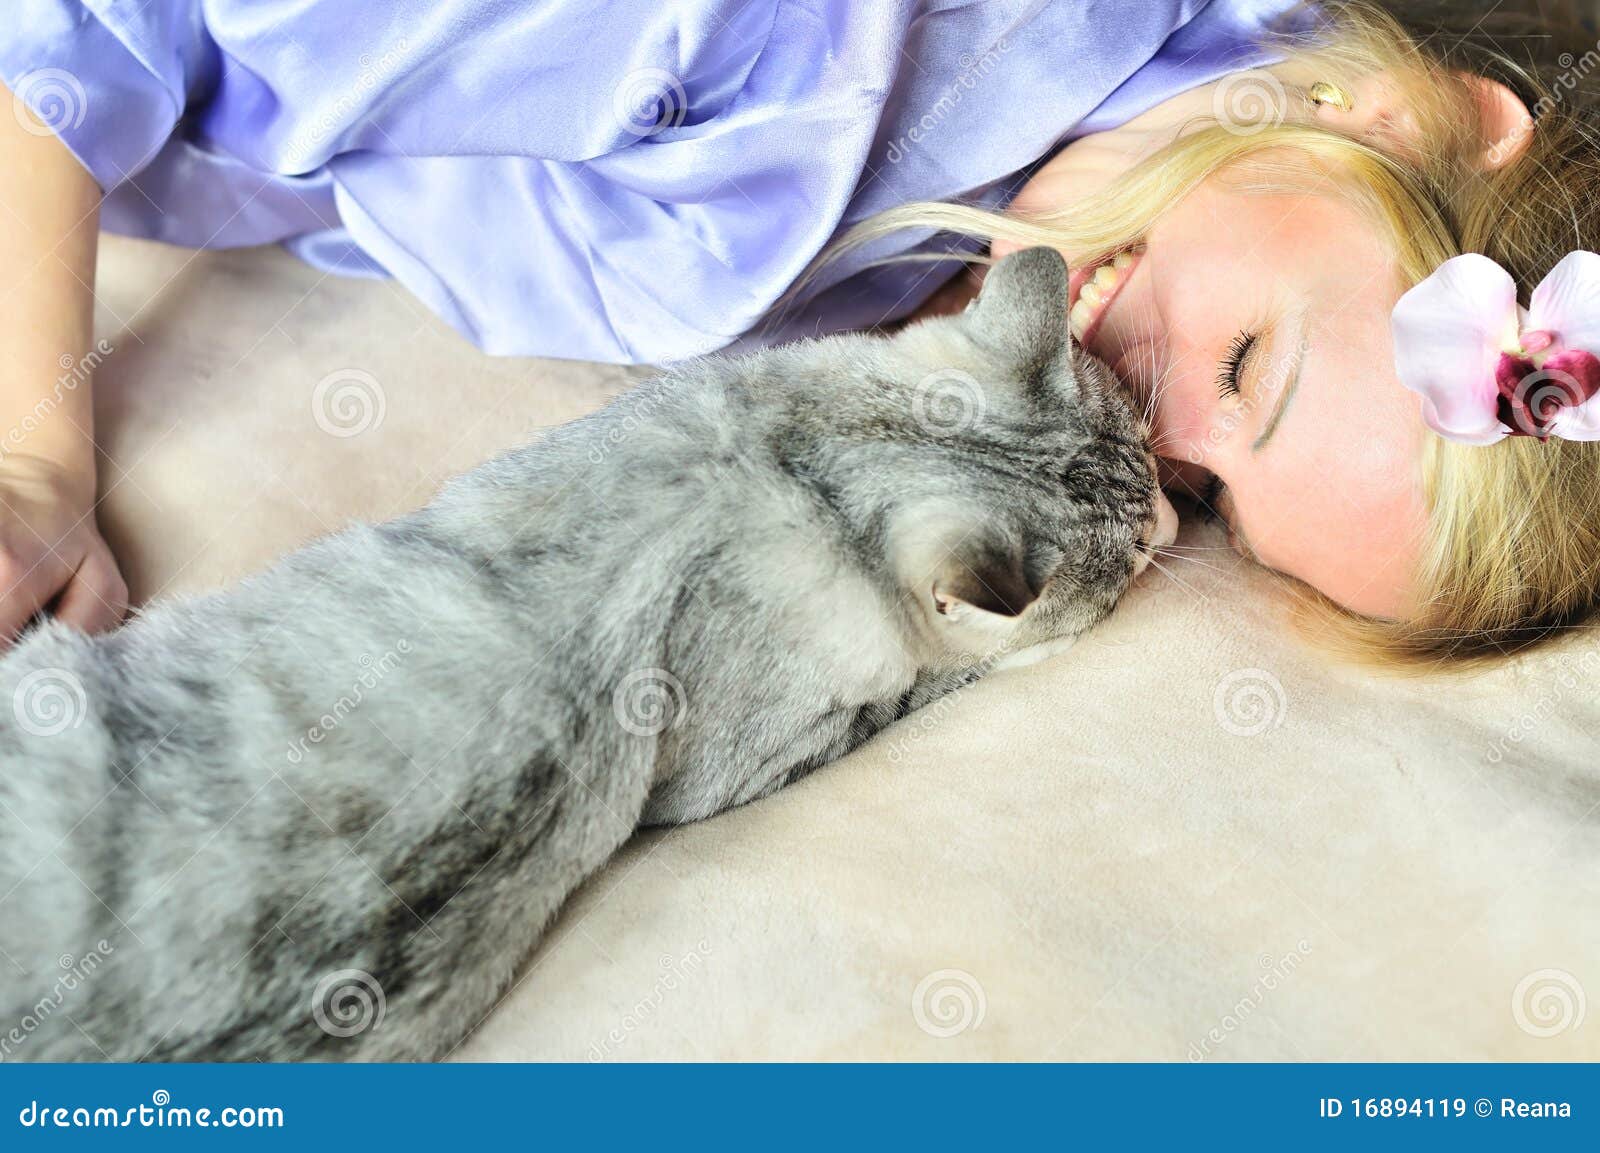 girl with caressing cat